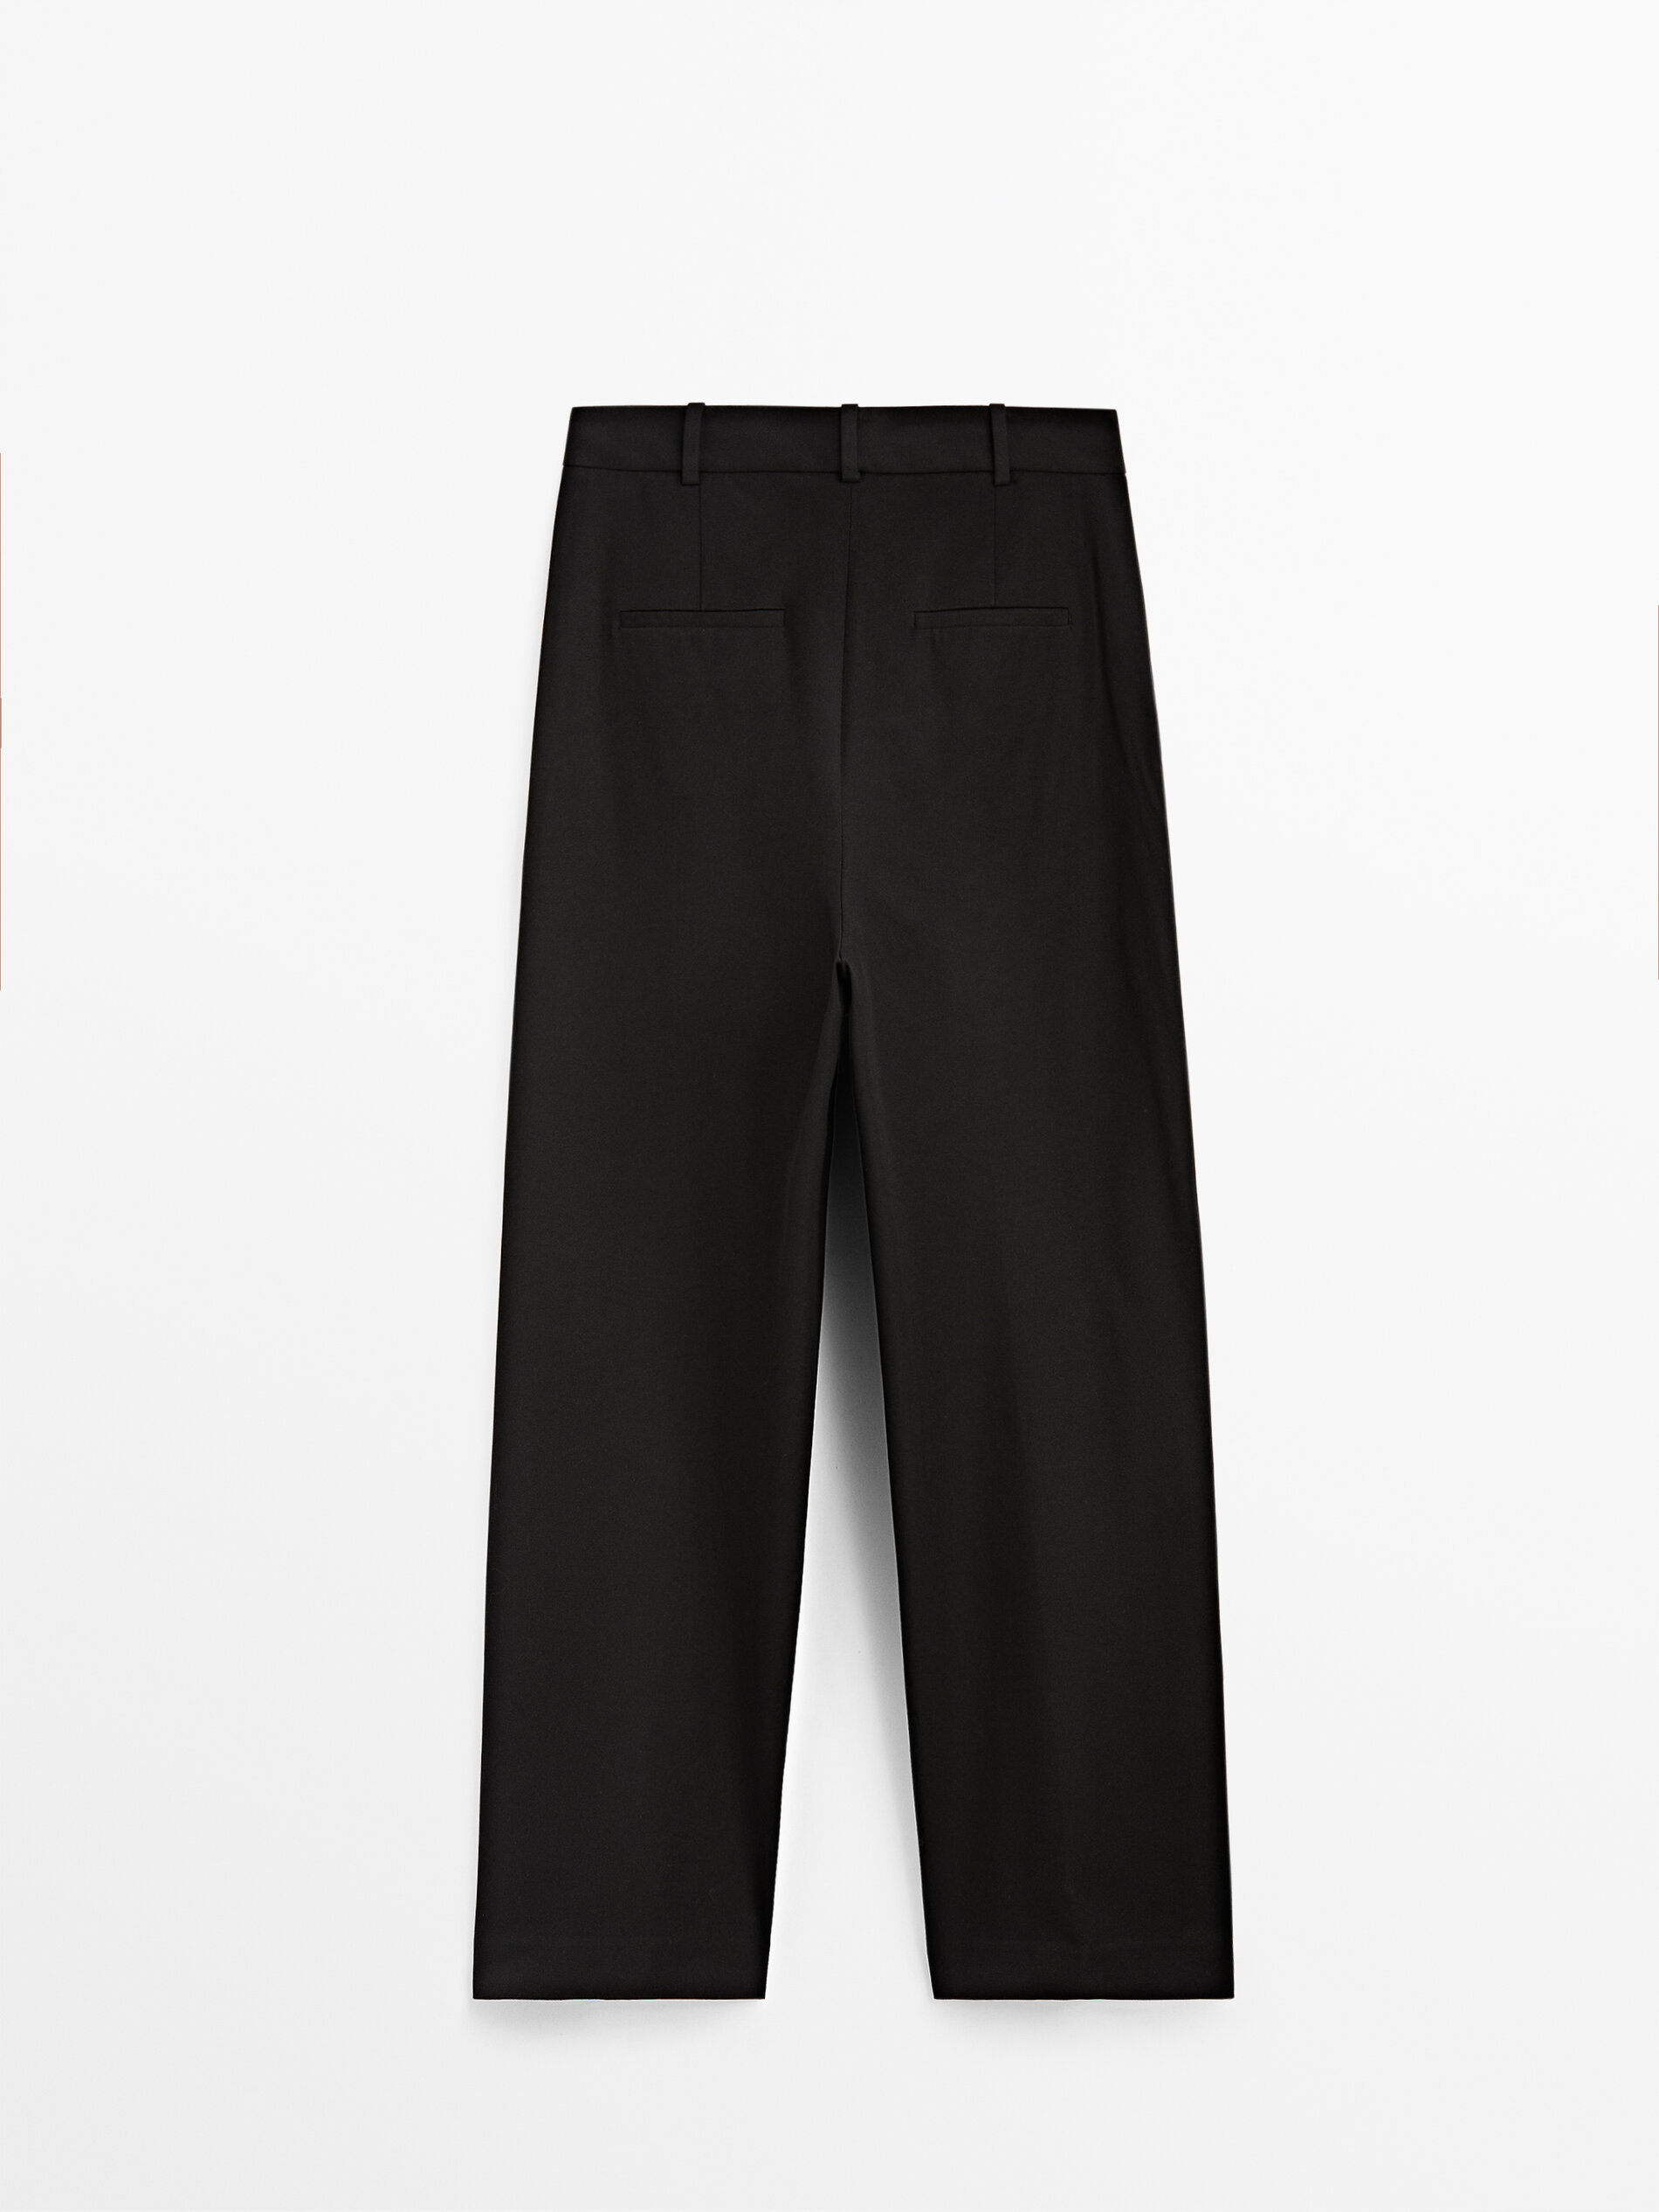 Massimo Dutti - Straight fit darted trousers